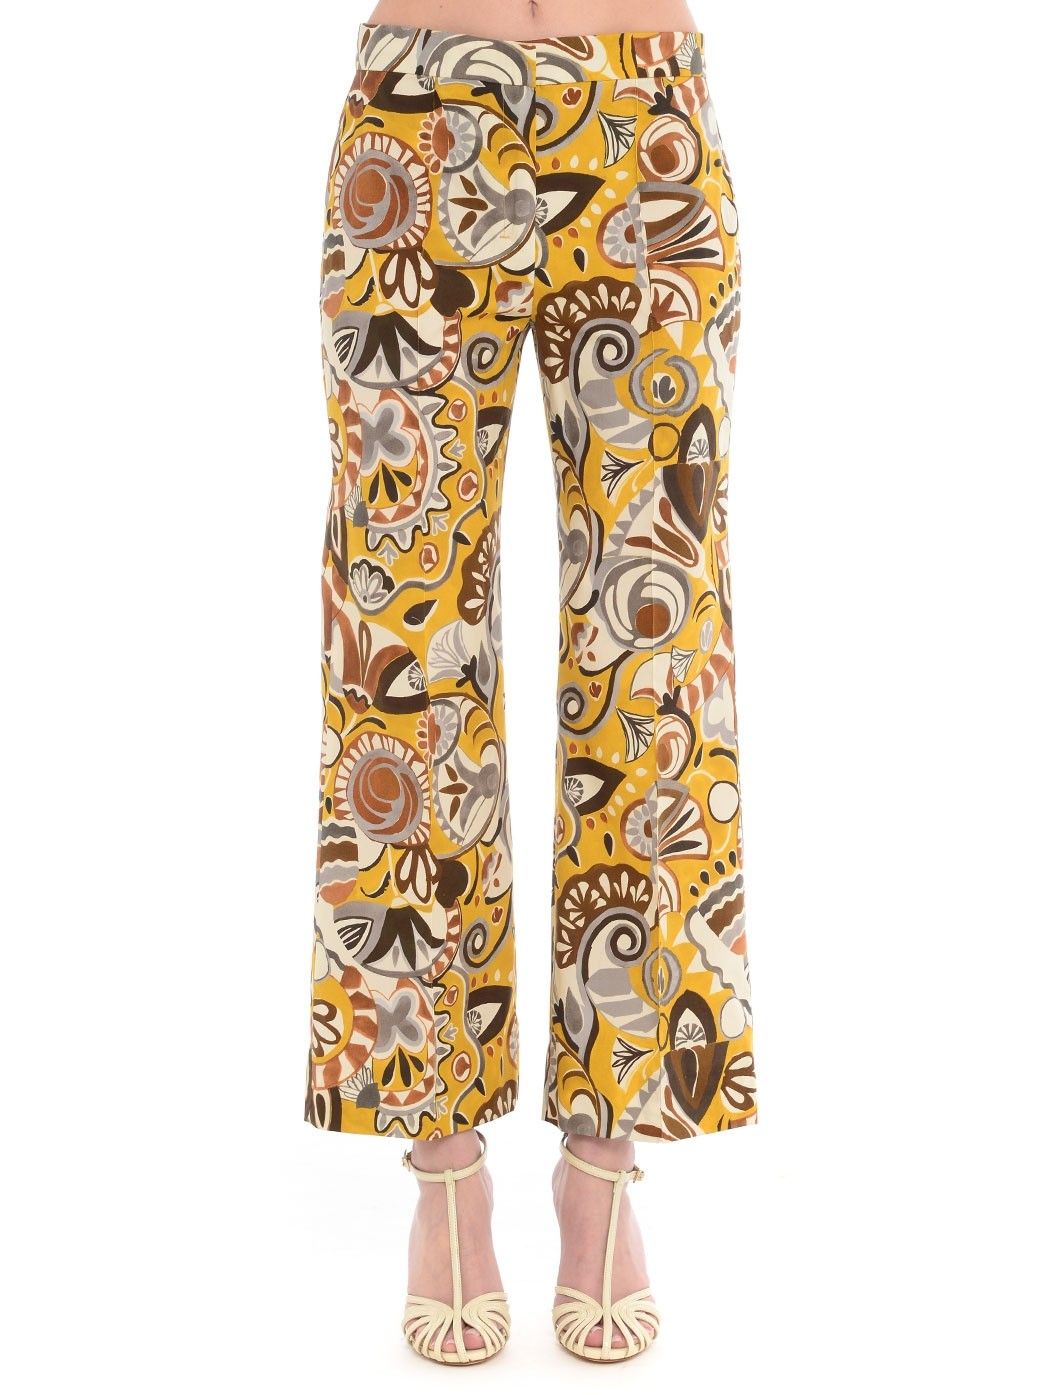  WOMAN TROUSERS,PALAZZO TROUSERS,SKINNY TROUSERS,MARNI TROUSERS,FORTE FORTE TROUSERS,8PM TROUSERS,MSGM TROUSERS,CROP PANTS  S MAX MARA LICIA